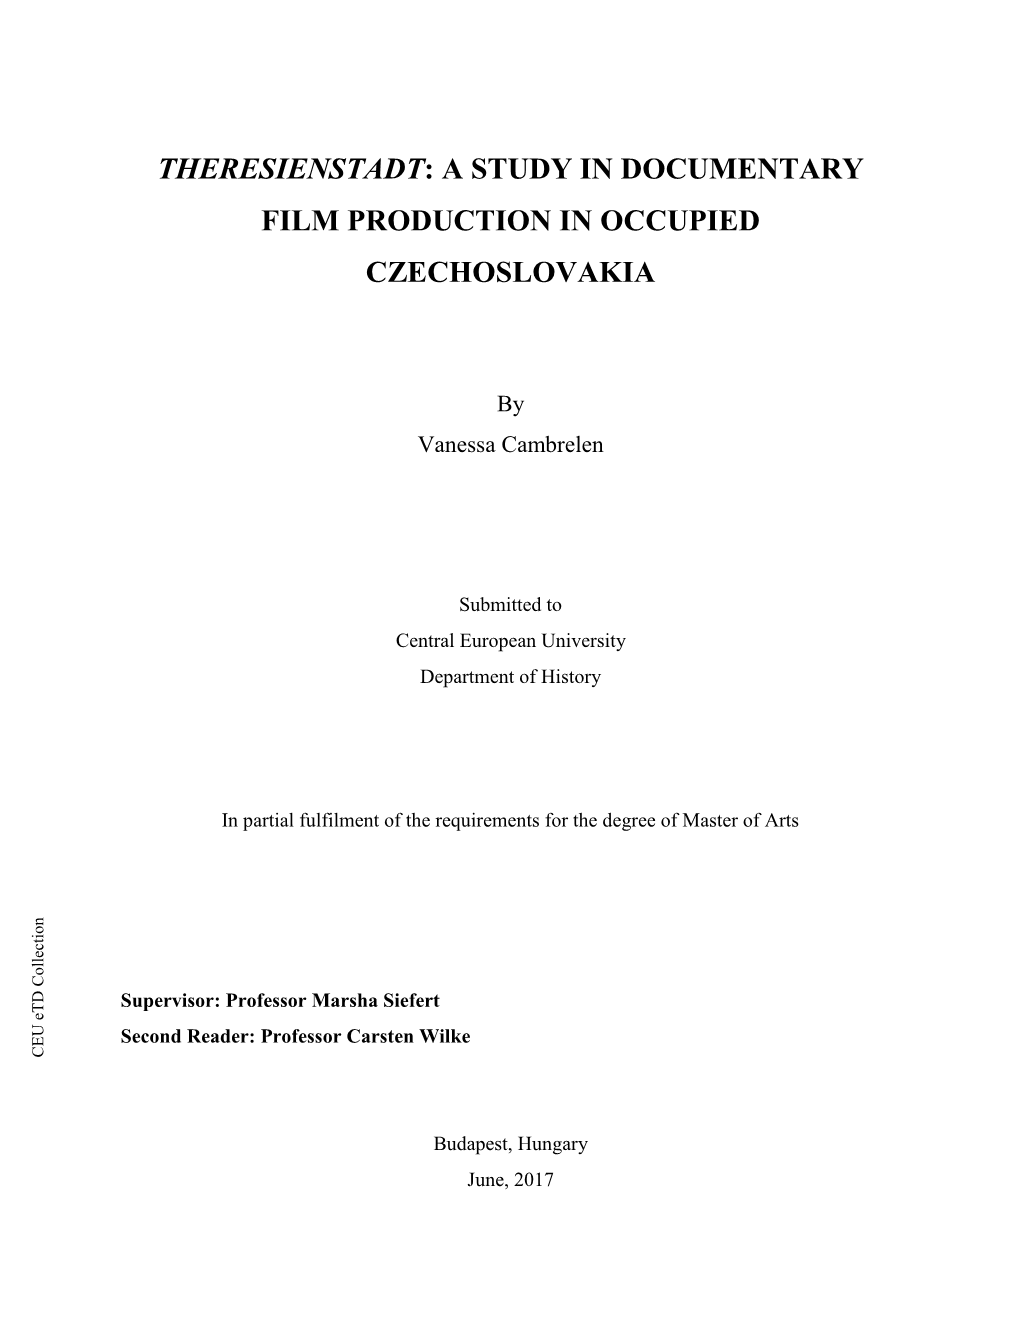 Theresienstadt: a Study in Documentary Film Production in Occupied Czechoslovakia